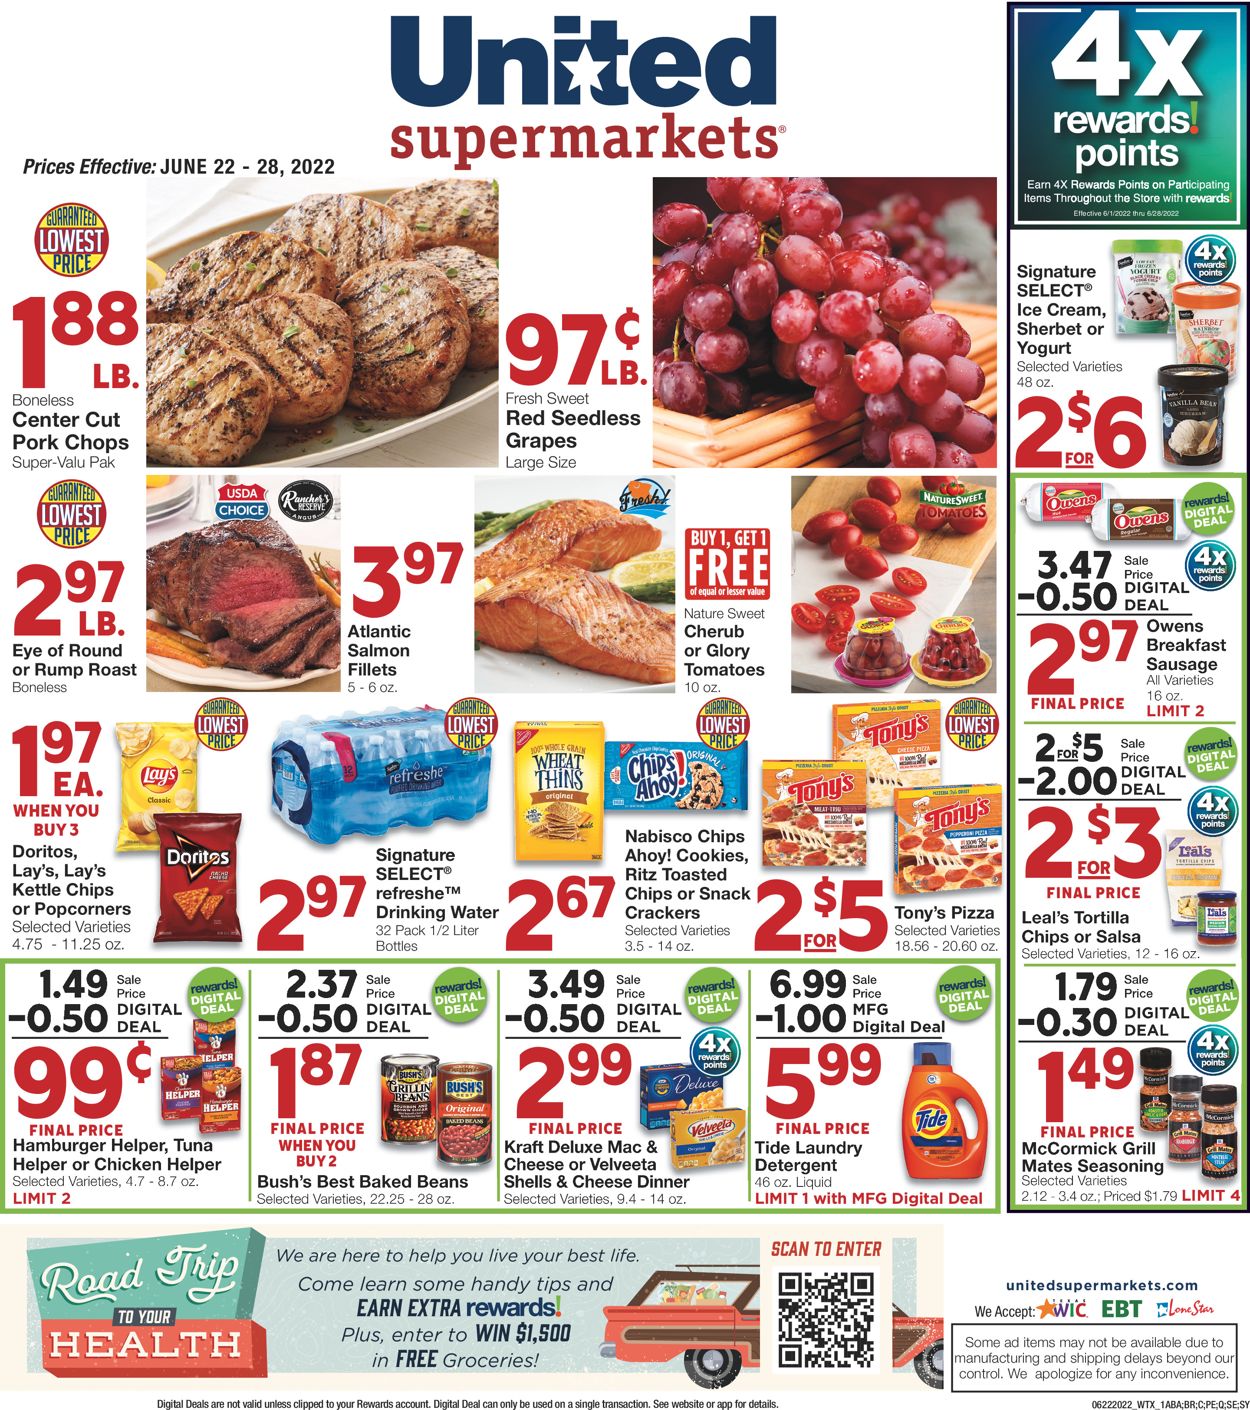 United Supermarkets Current weekly ad 06/22 - 06/28/2022 - frequent-ads.com